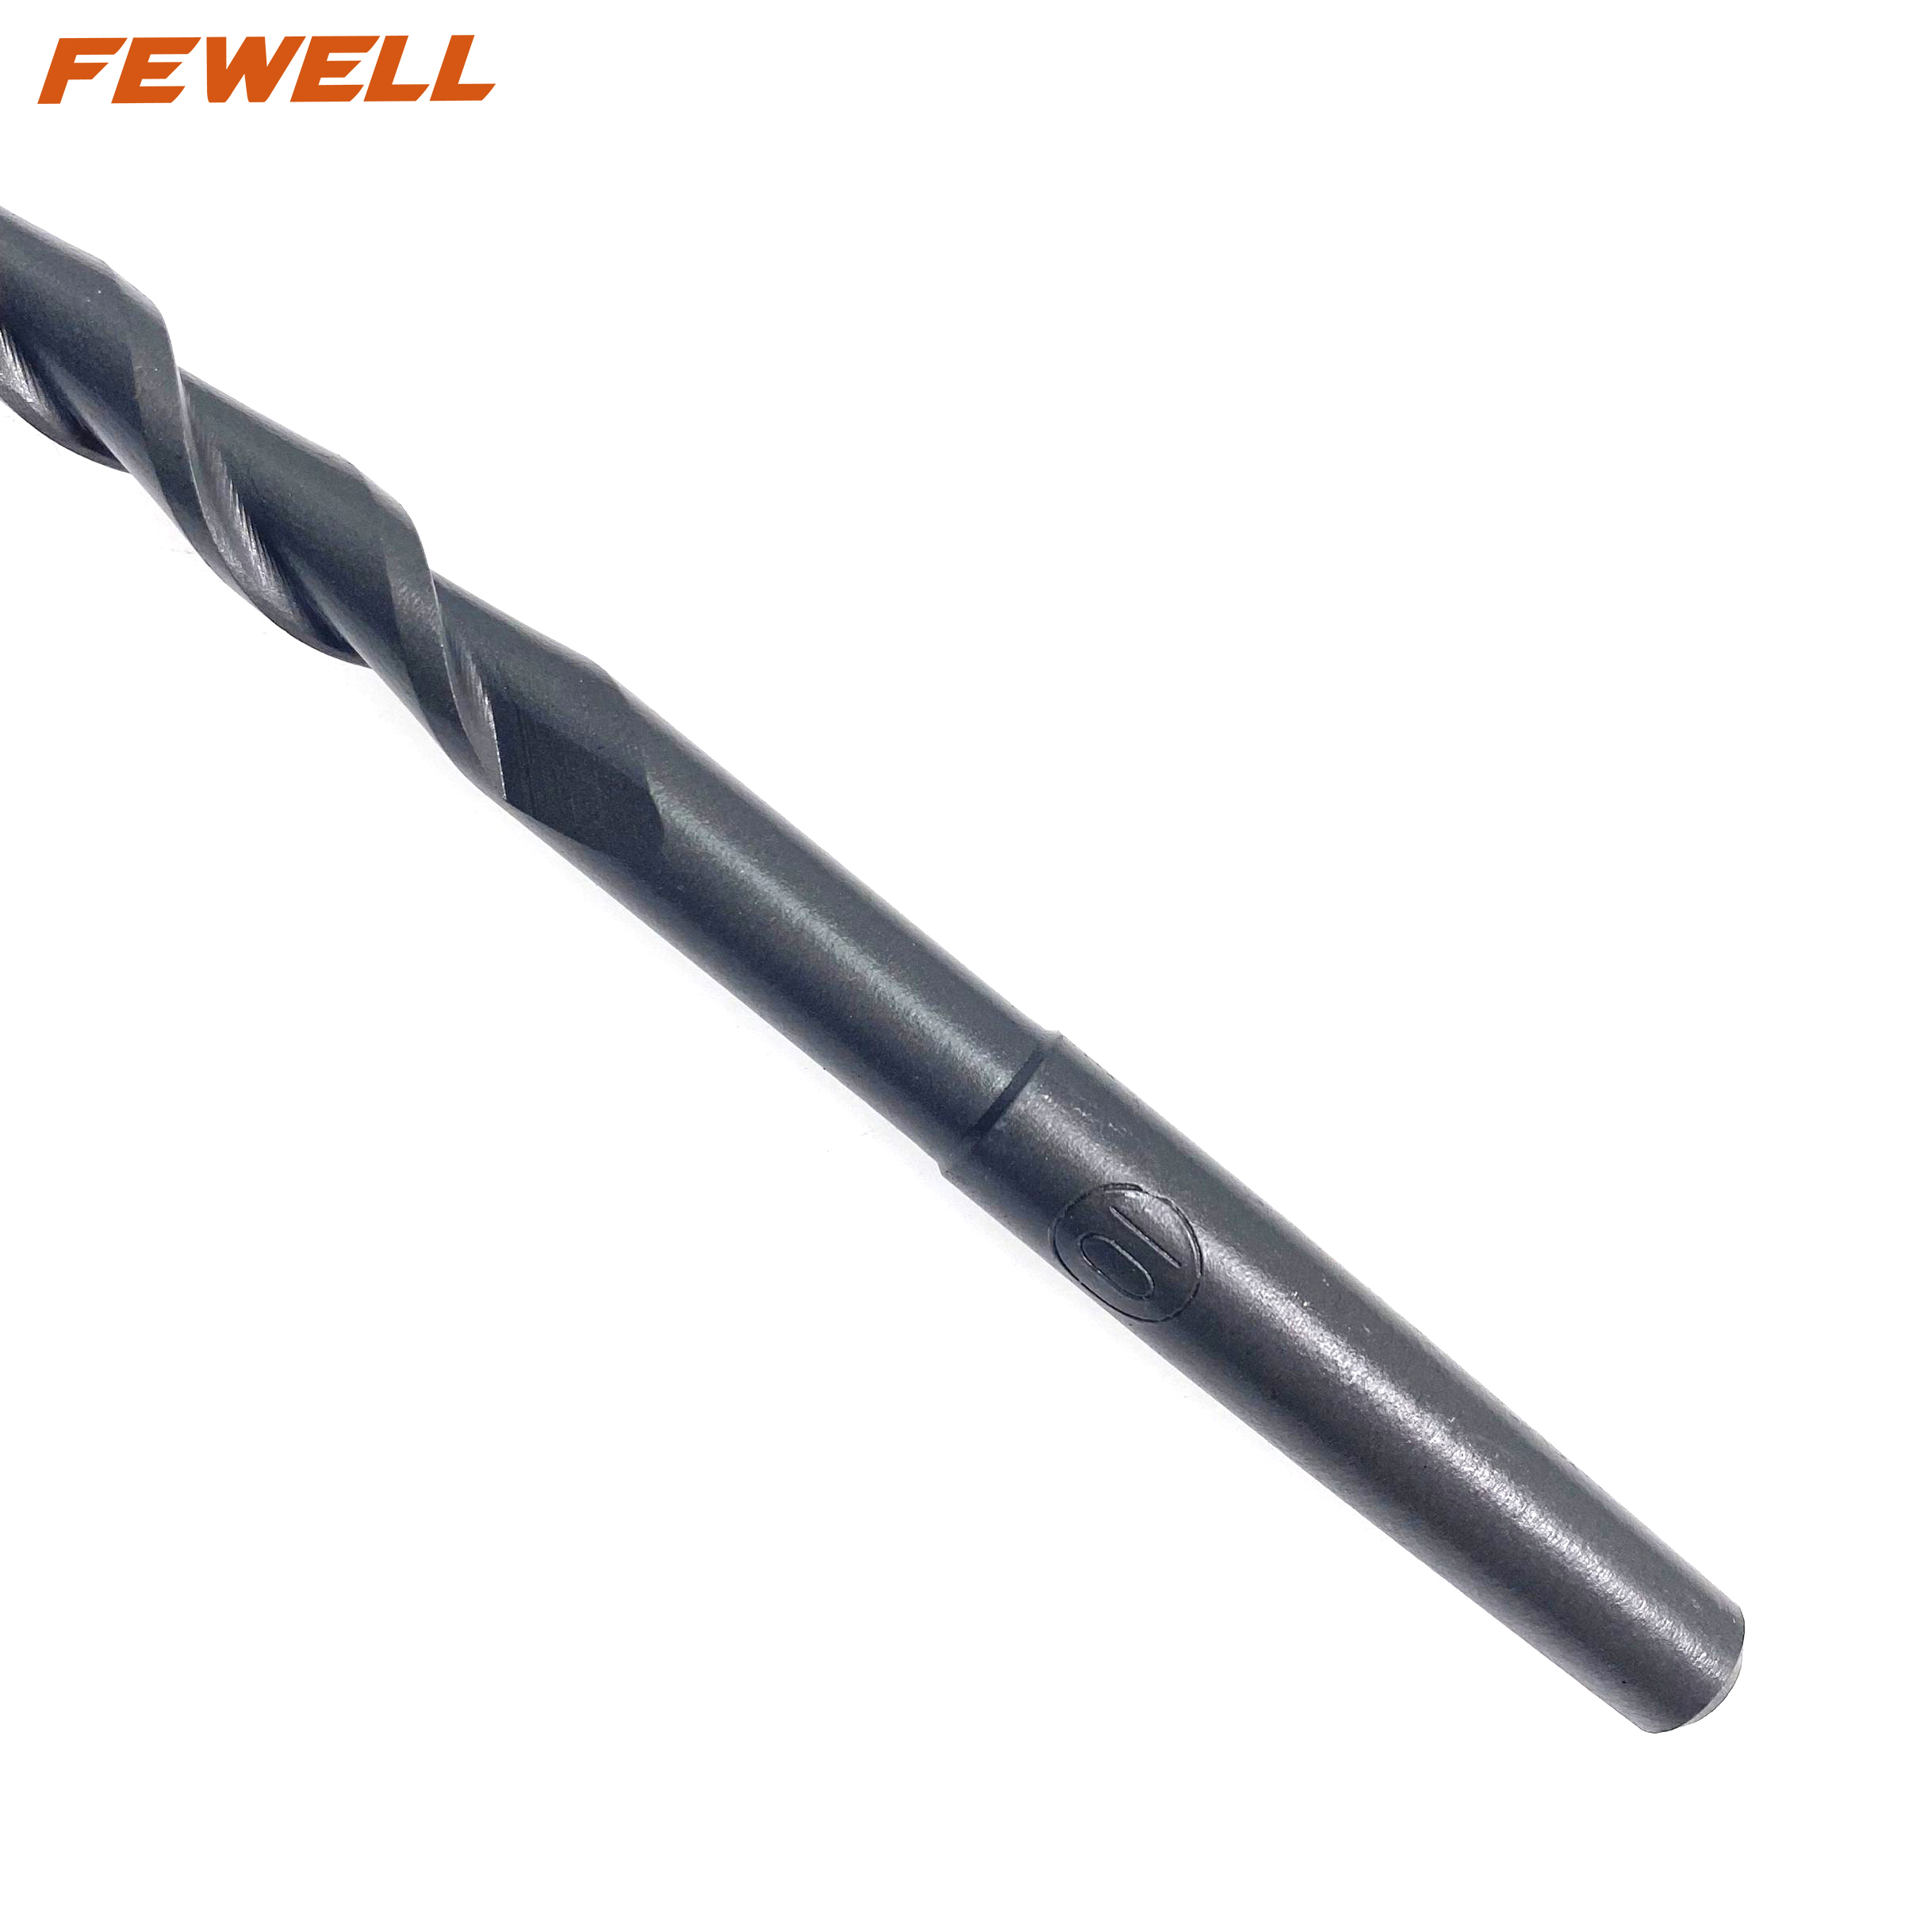 High quality 10x200mm Carbide Tipped Single Flute Round Shank pilot drill bit for Brick Concrete Masonry Drilling